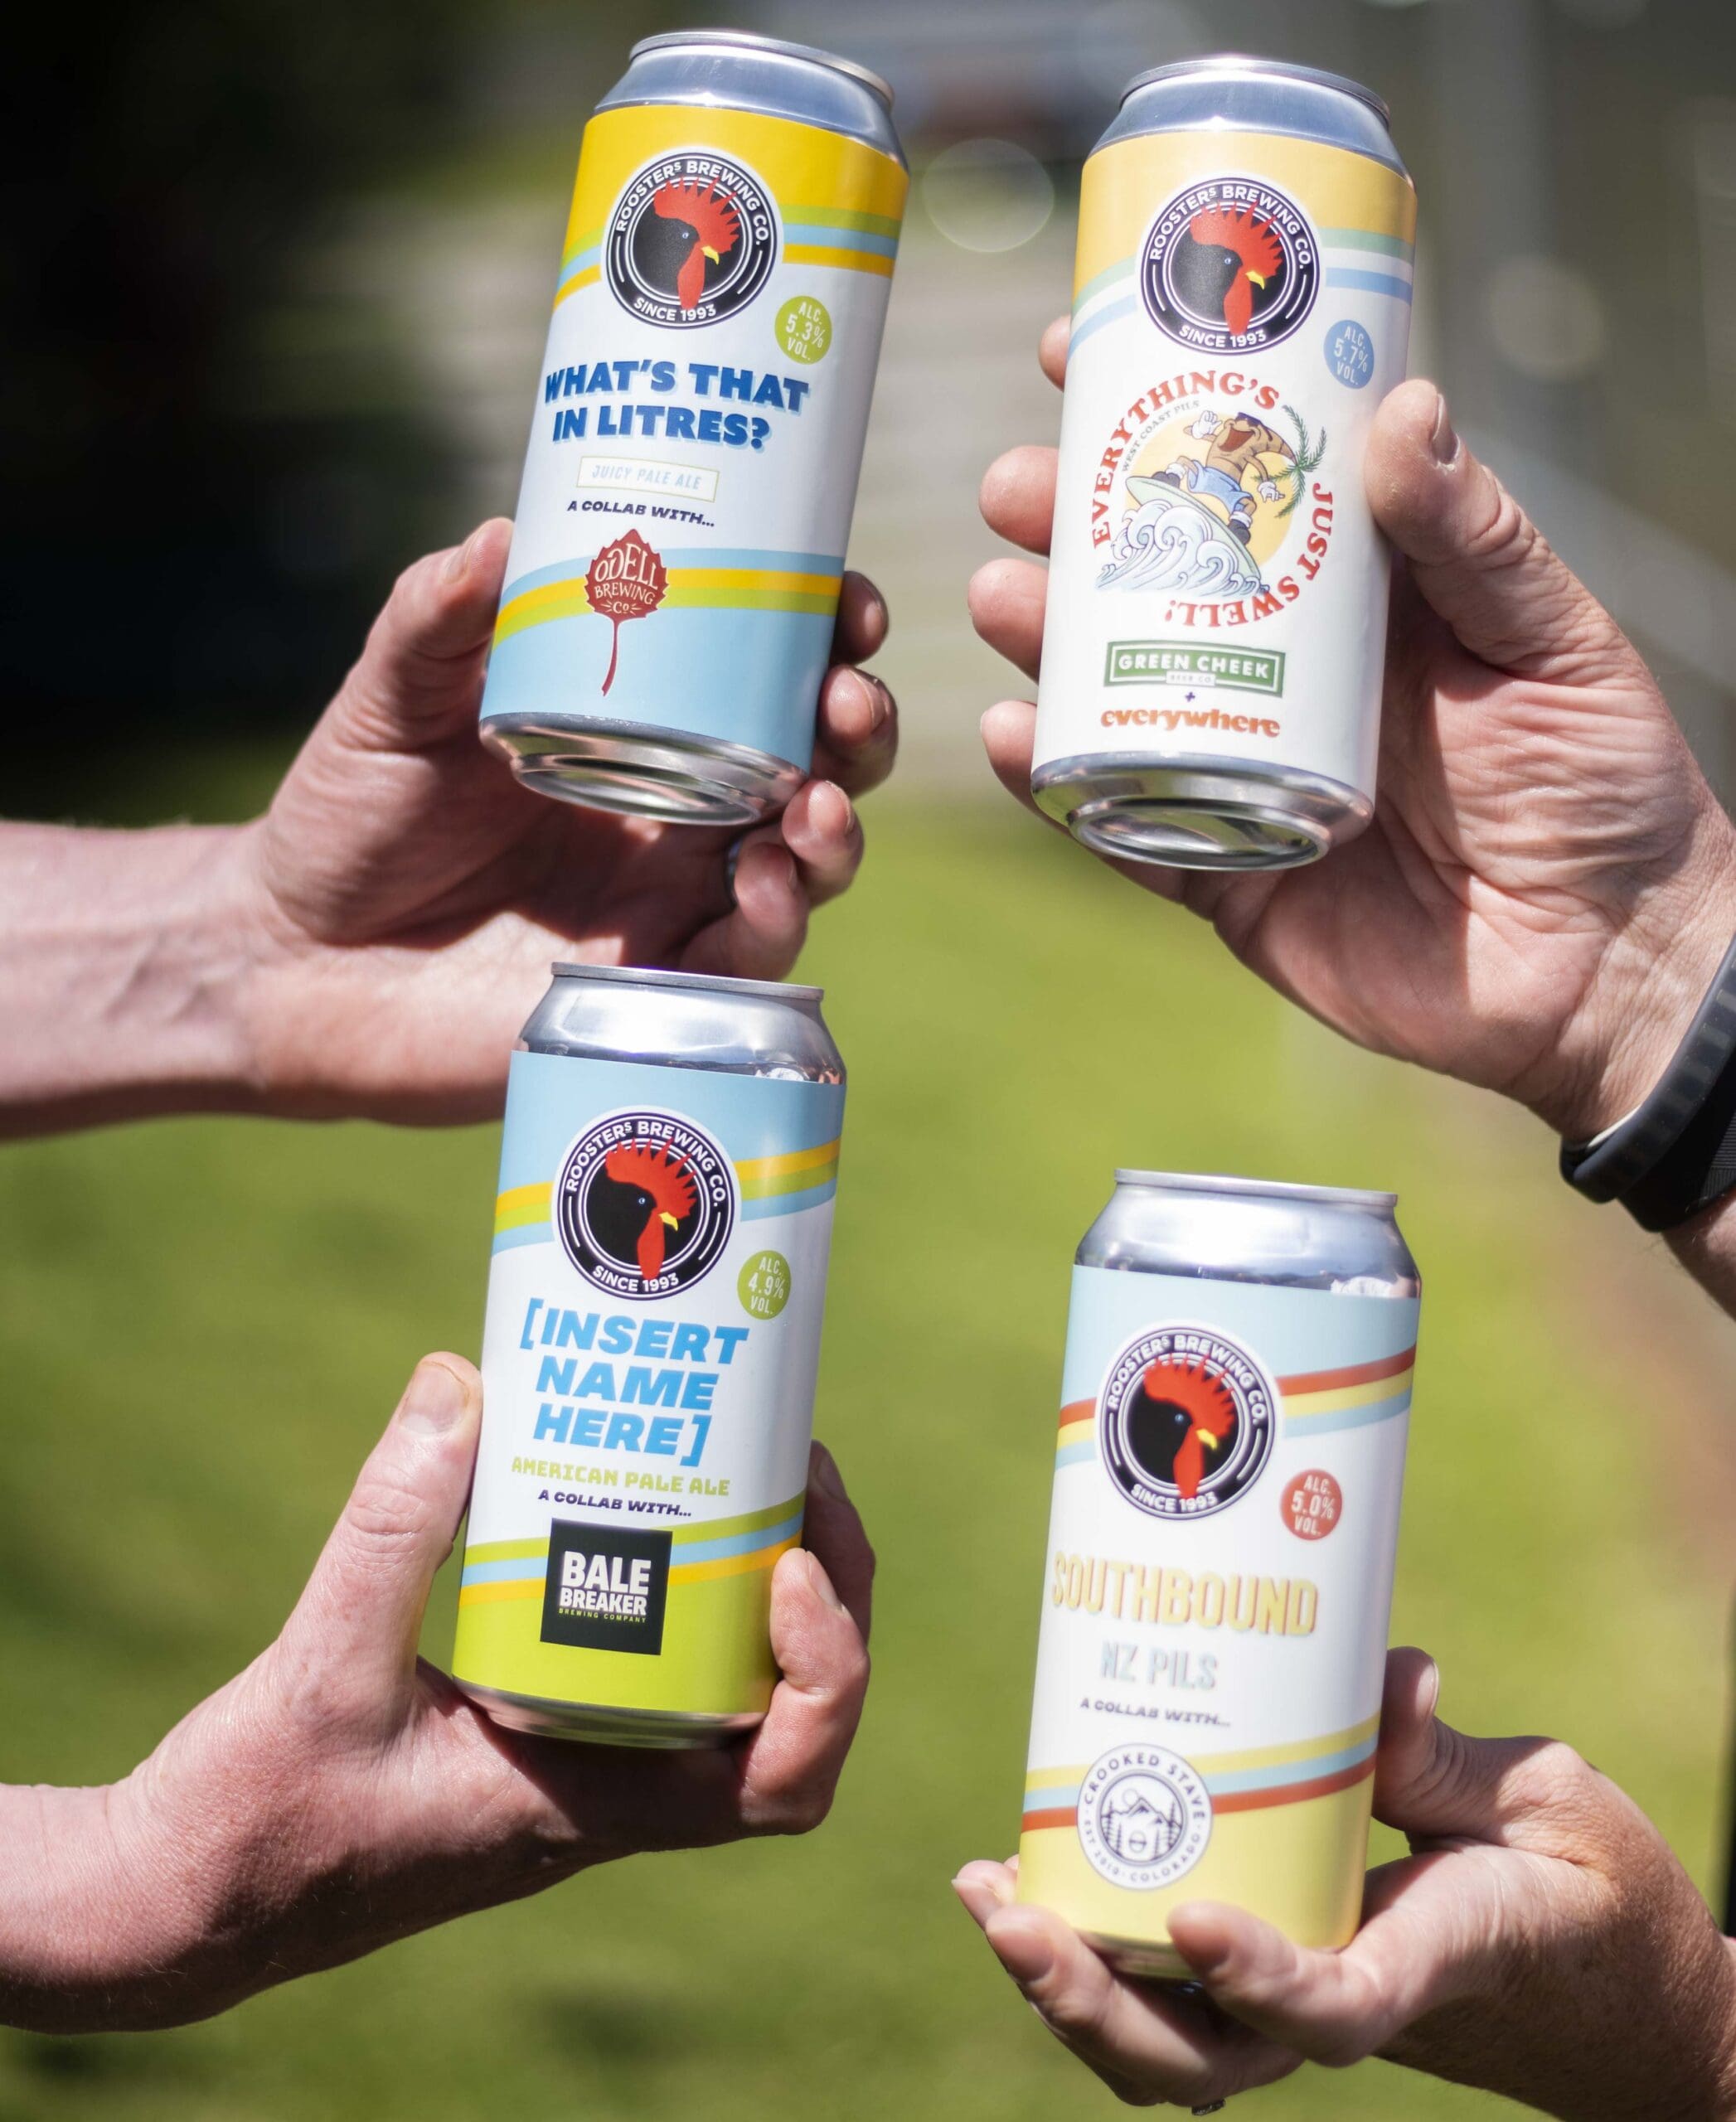 An American Celebration With Rooster’s Brewing Co. | The British Guild ...